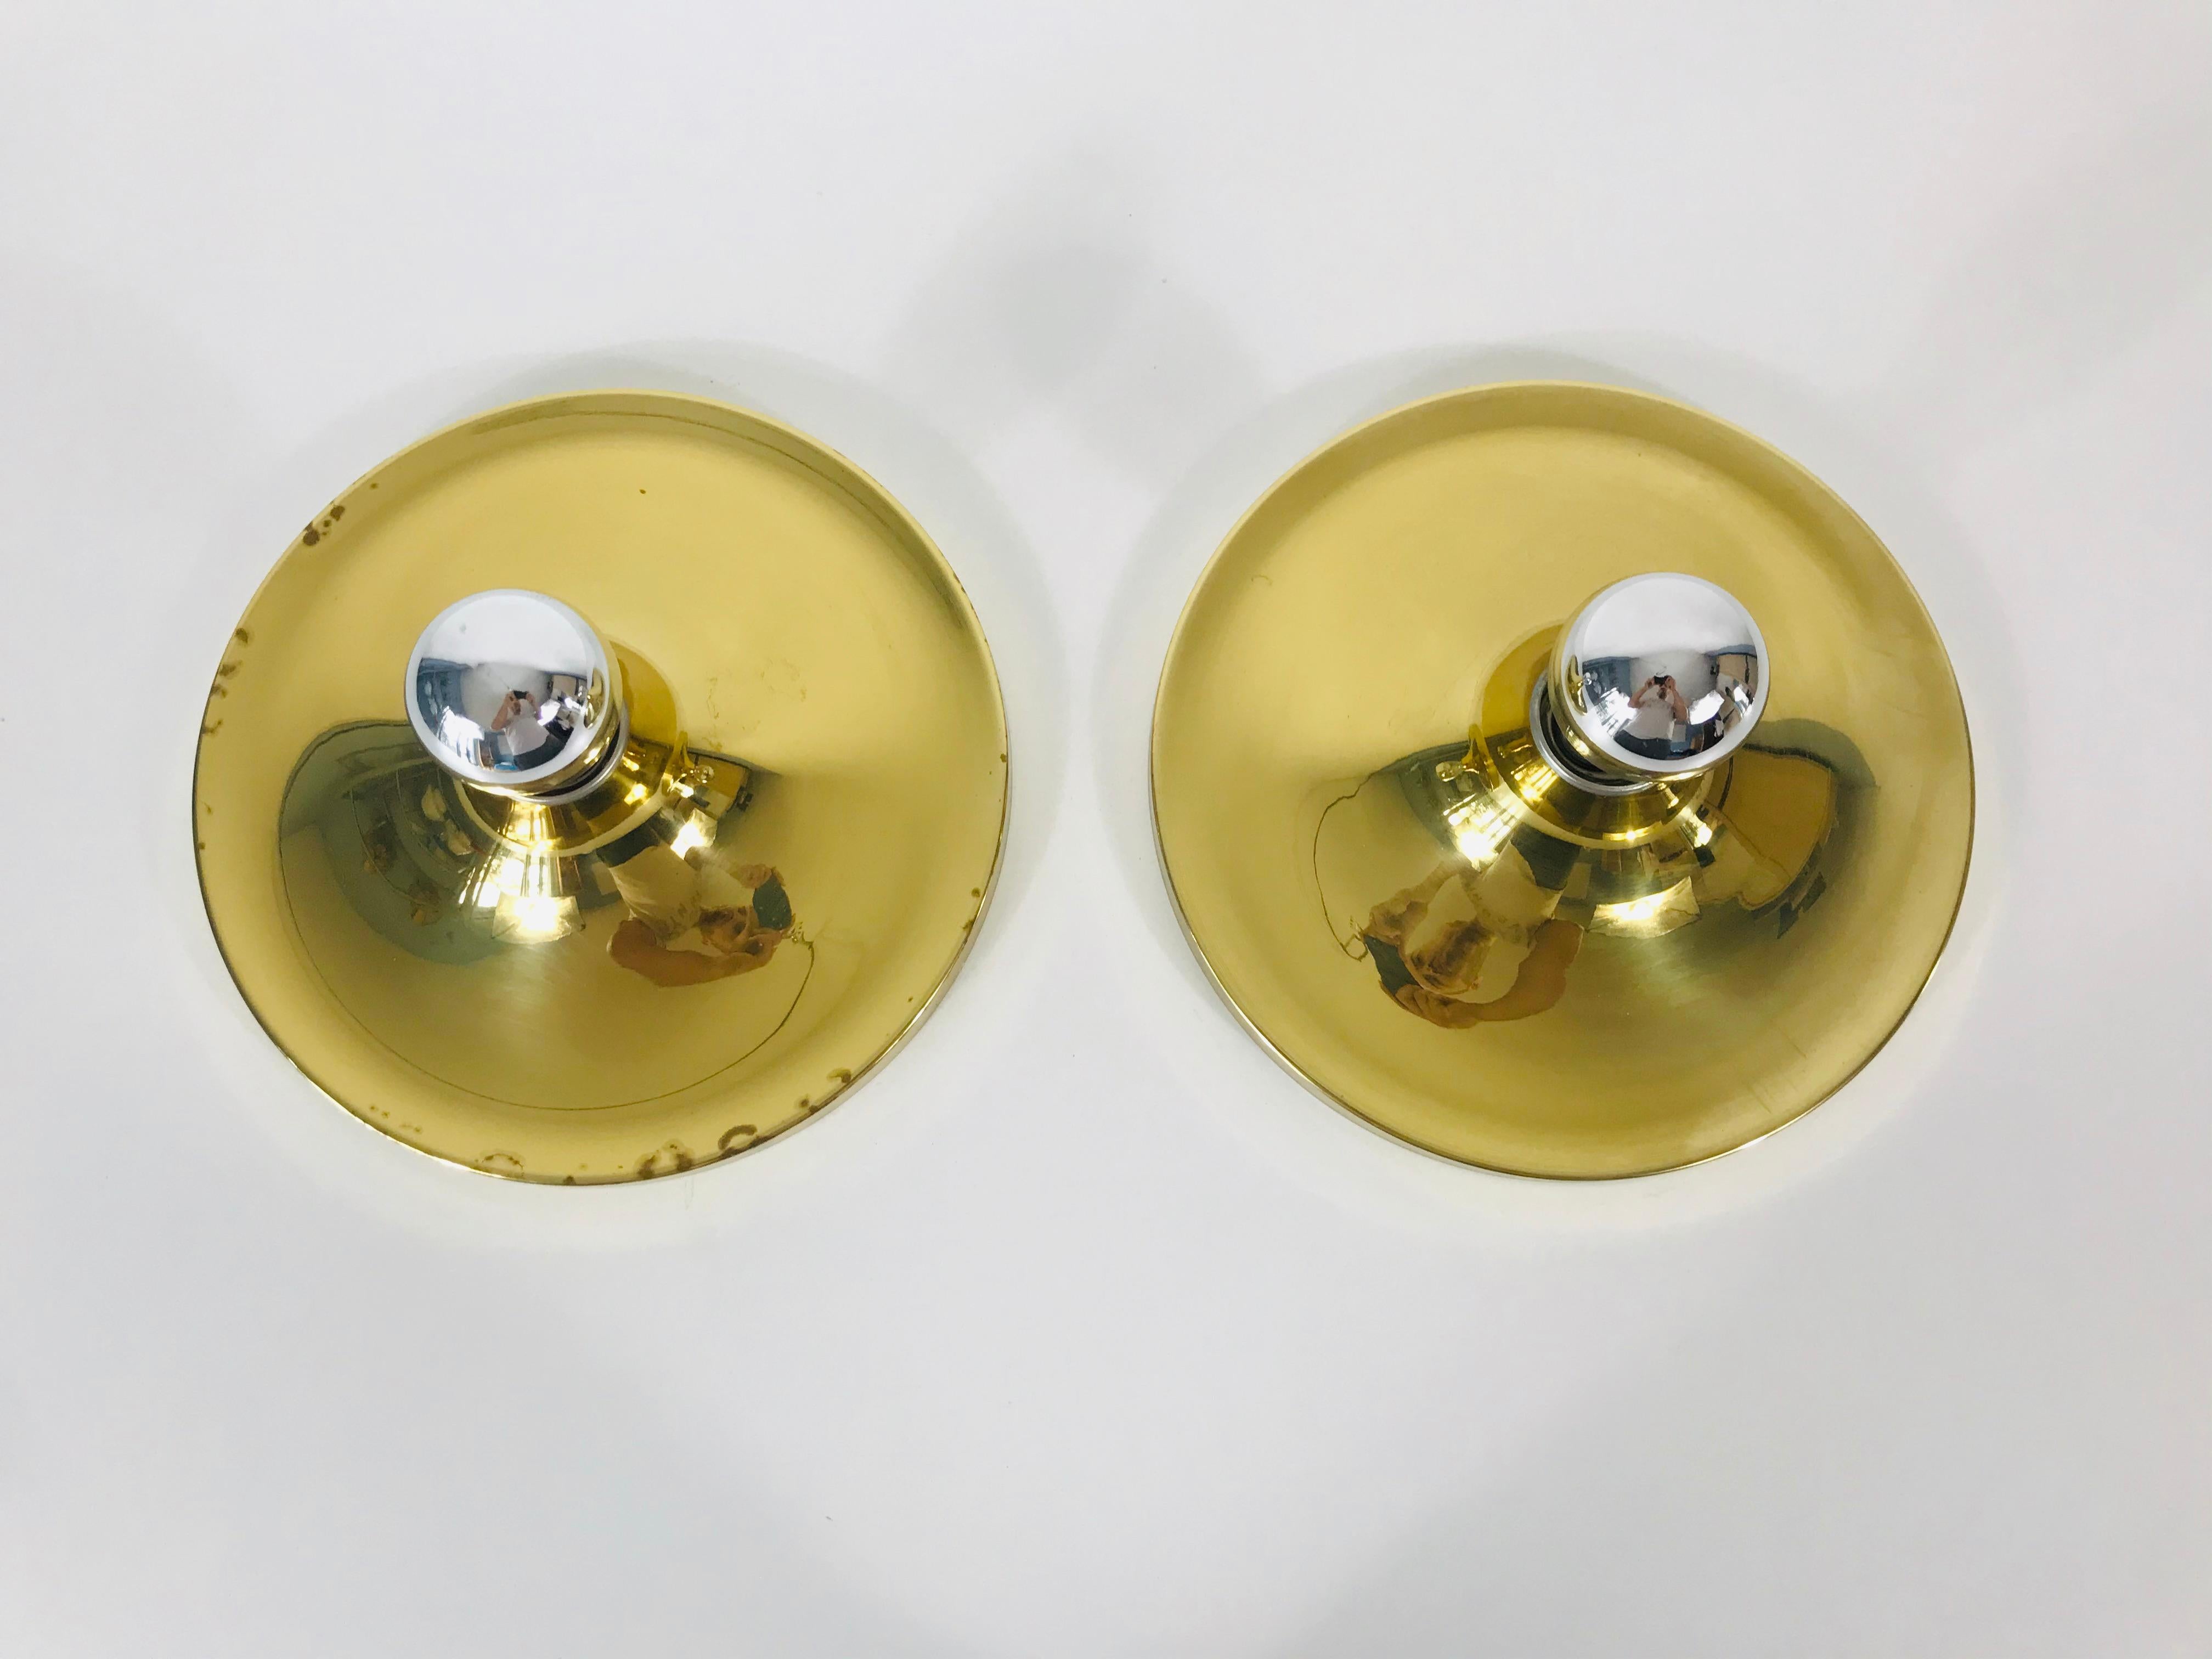 Exceptional Pair of Golden Mid-Century Modern Wall Lamps, 1960s, Germany For Sale 4